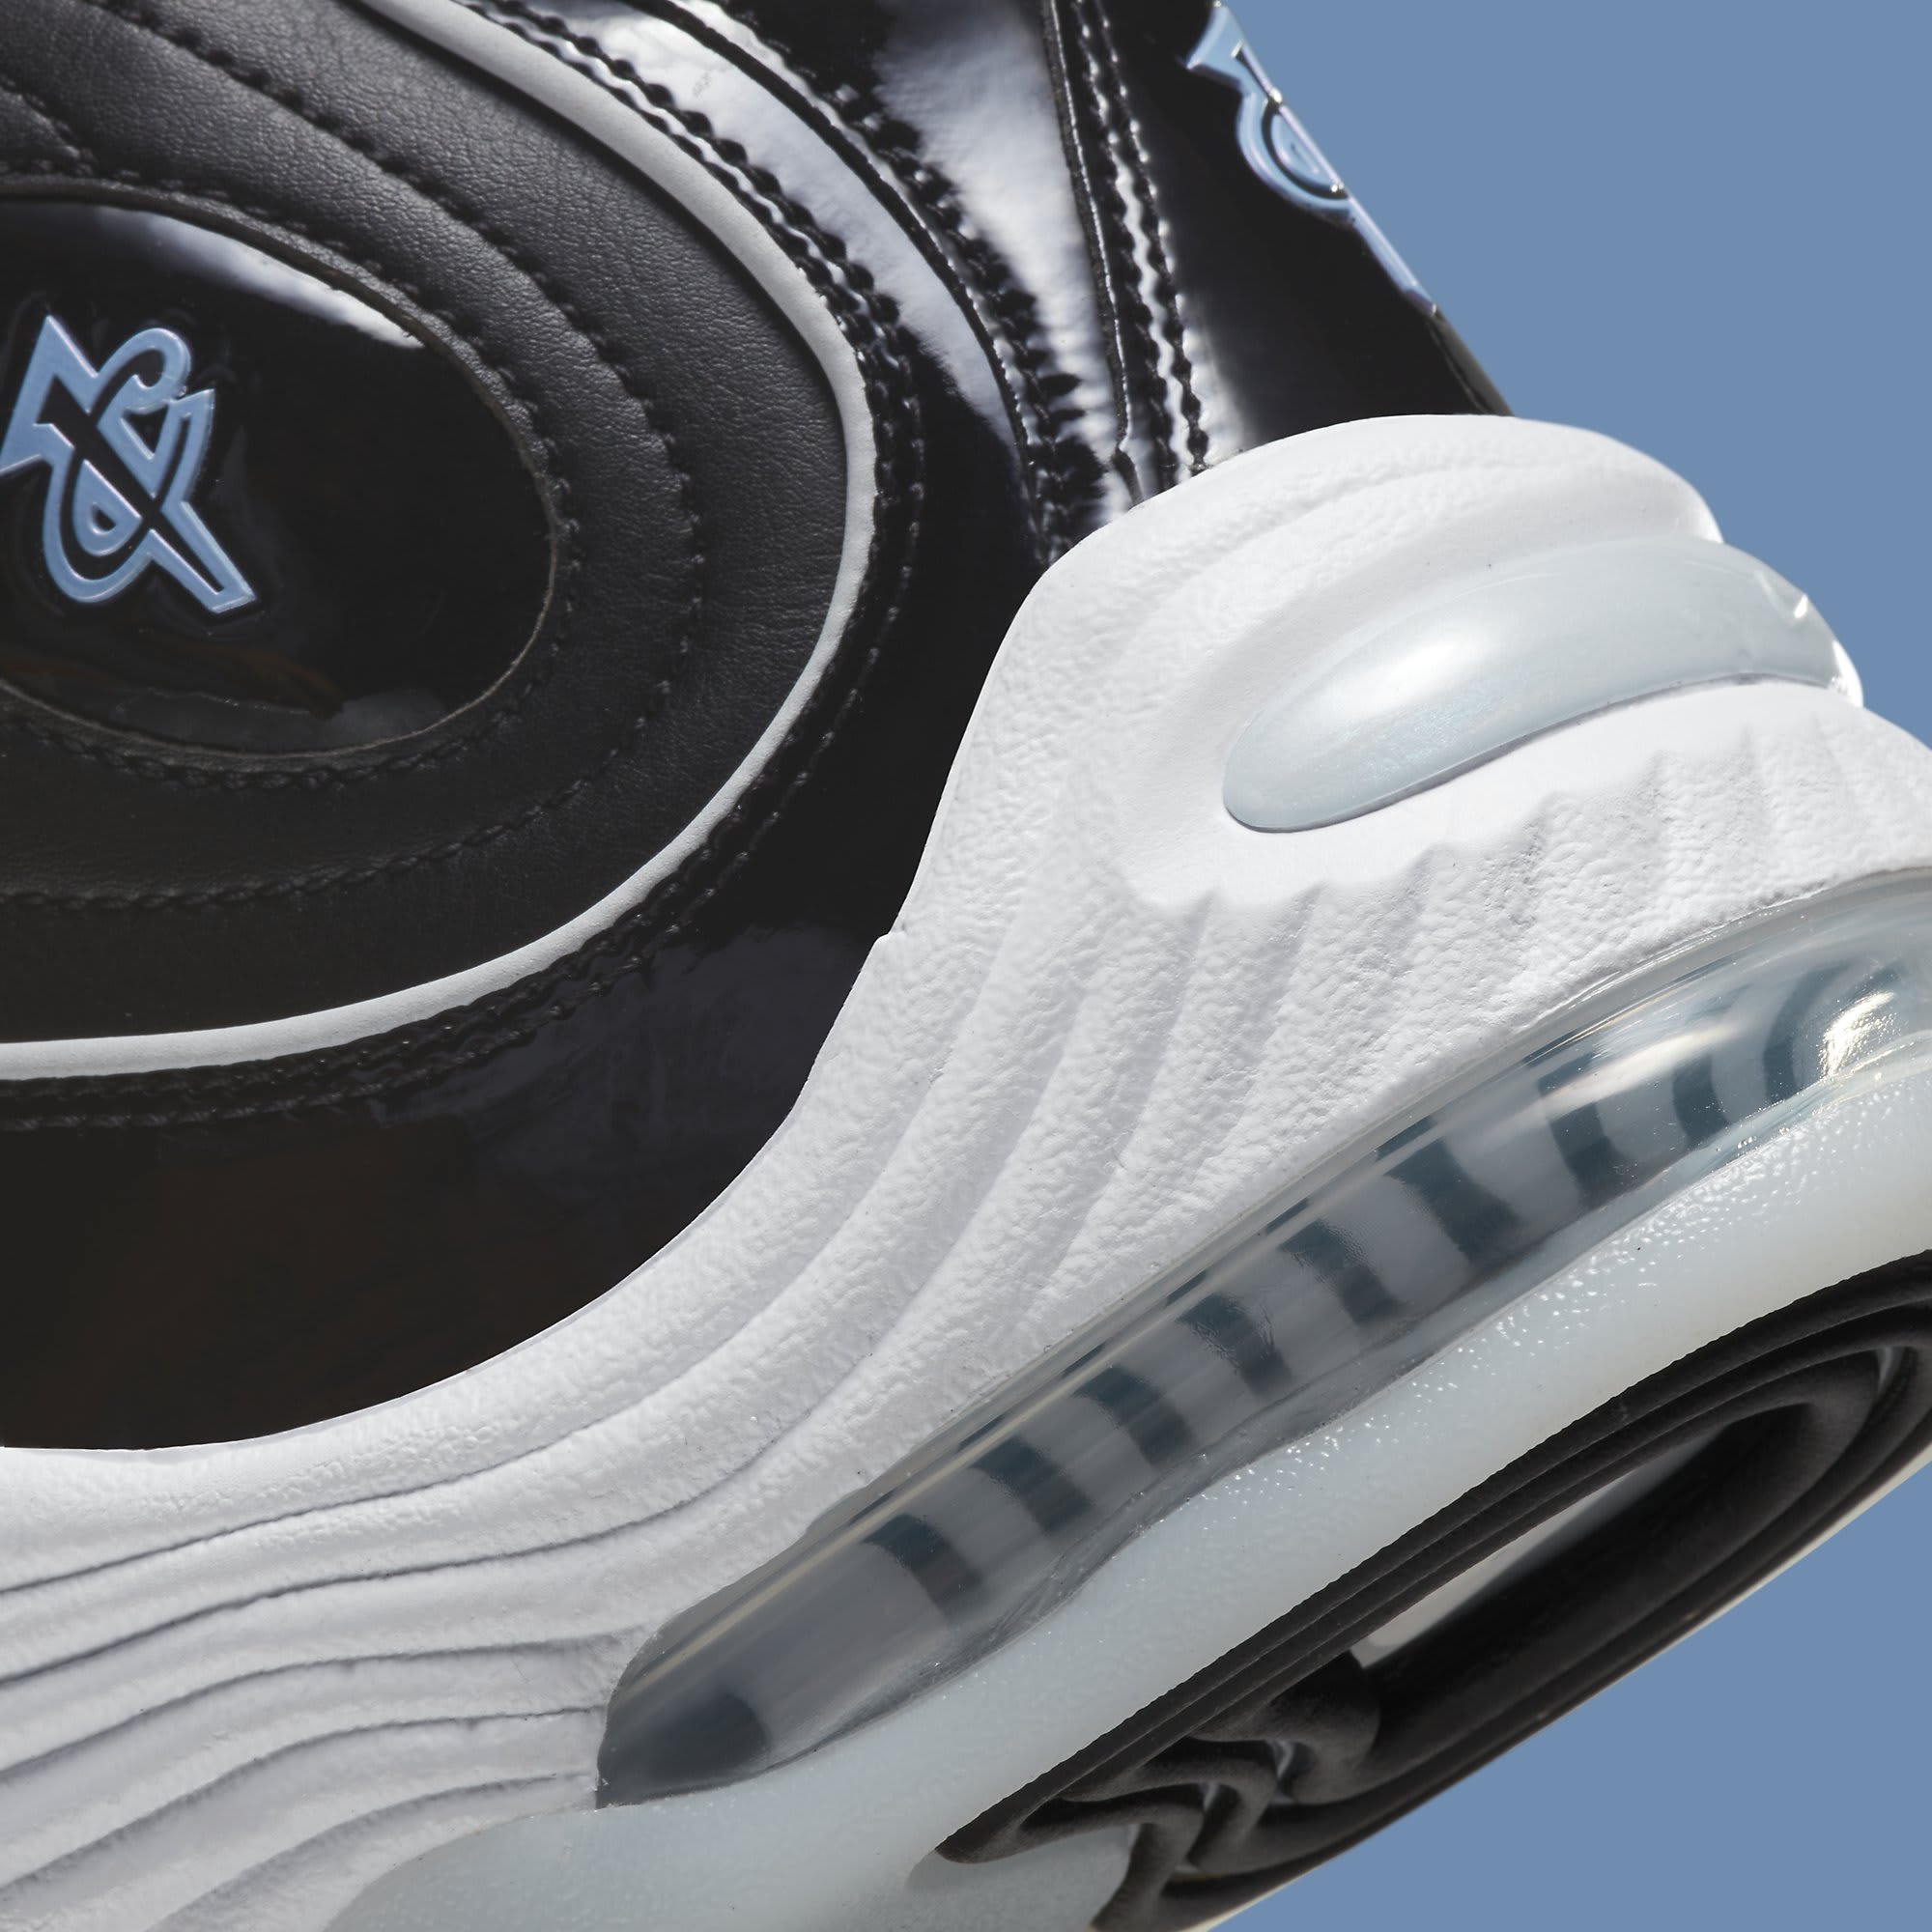 Black And Football Grey Cover This Nike Air Penny 2 - Sneaker News